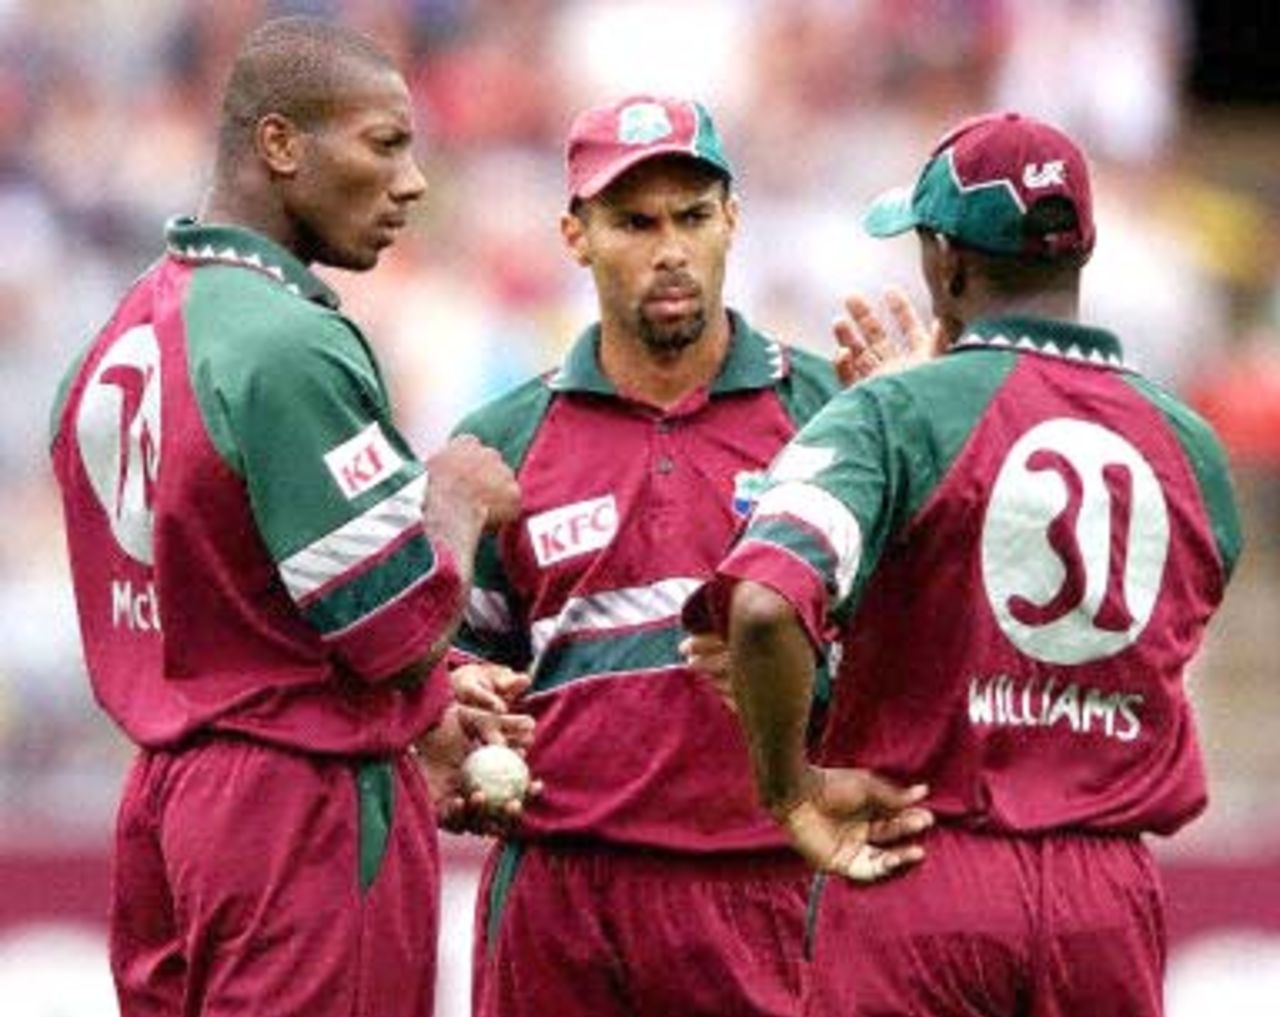 West Indian captain Jimmy Adams (C) discusses with his bowlers Nixon McLean (L) and Laurie William (R) how to stop the onslaught from the Australian batsmen during the 2nd one-day final against the West Indies at the MCG in Melbourne 09 February 2001. Australia amassed the huge total of 338-6 with Mark Waugh topscoring with 173.